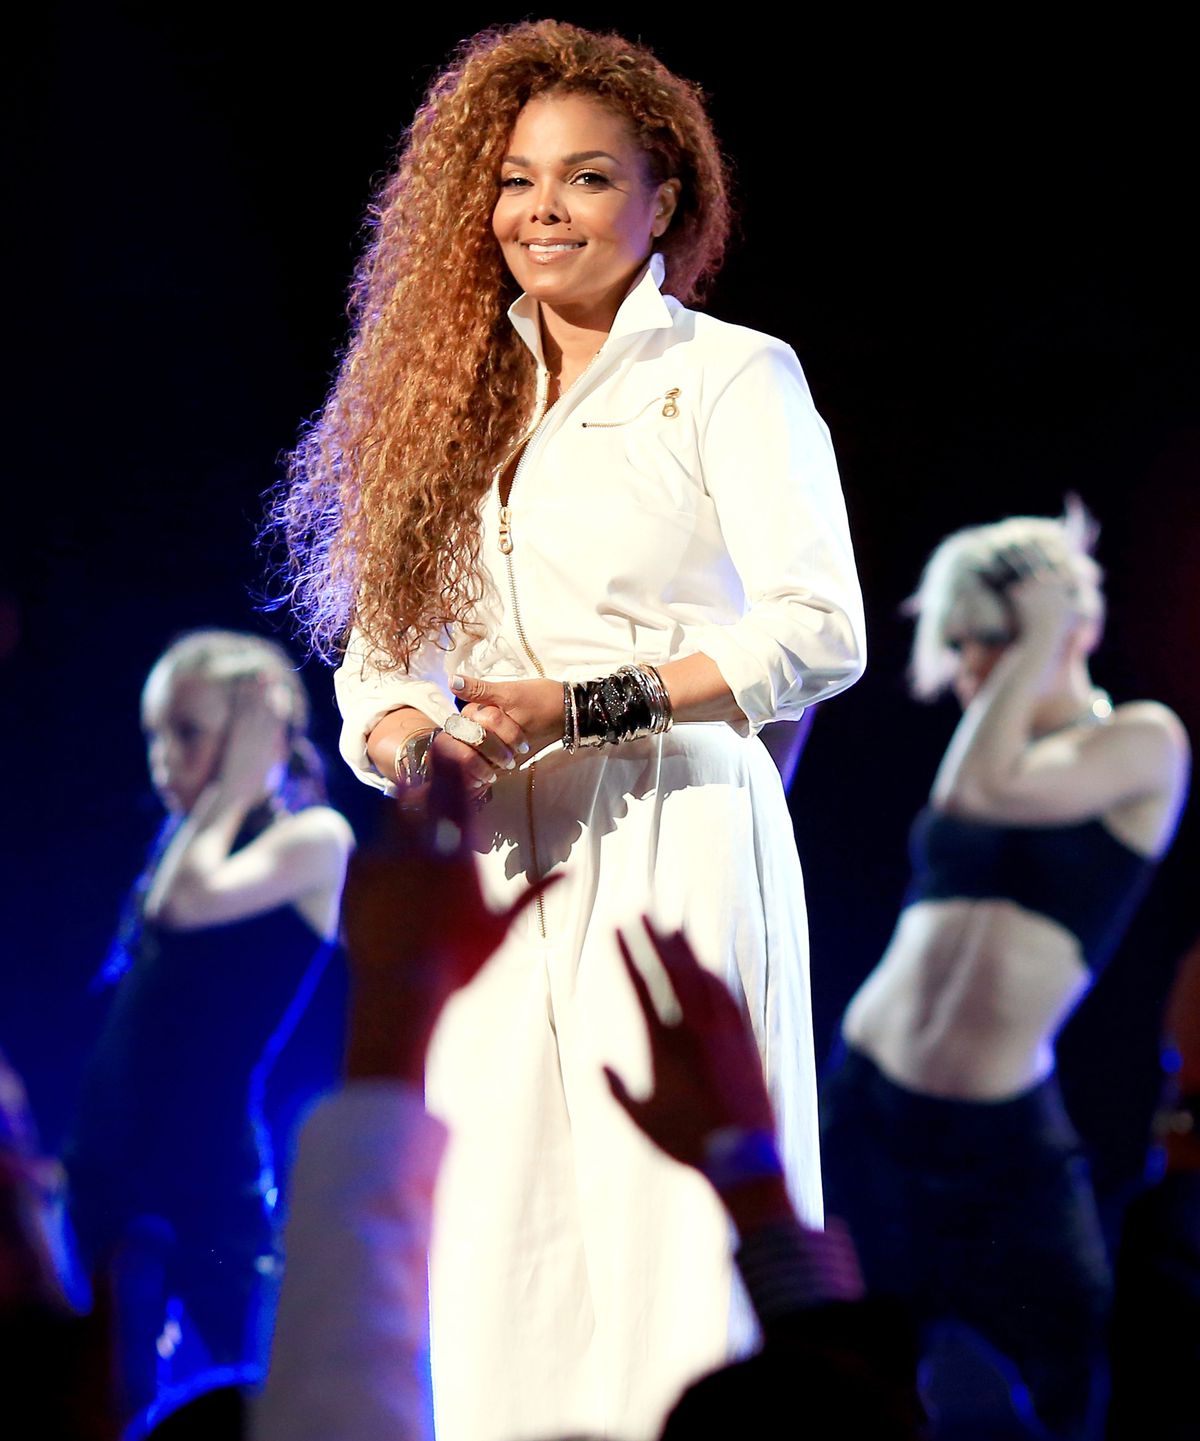 Honoree Janet Jackson performs onstage during the 2015 BET Awards at the Microsoft Theater on June 28, 2015 in Los Angeles, California.